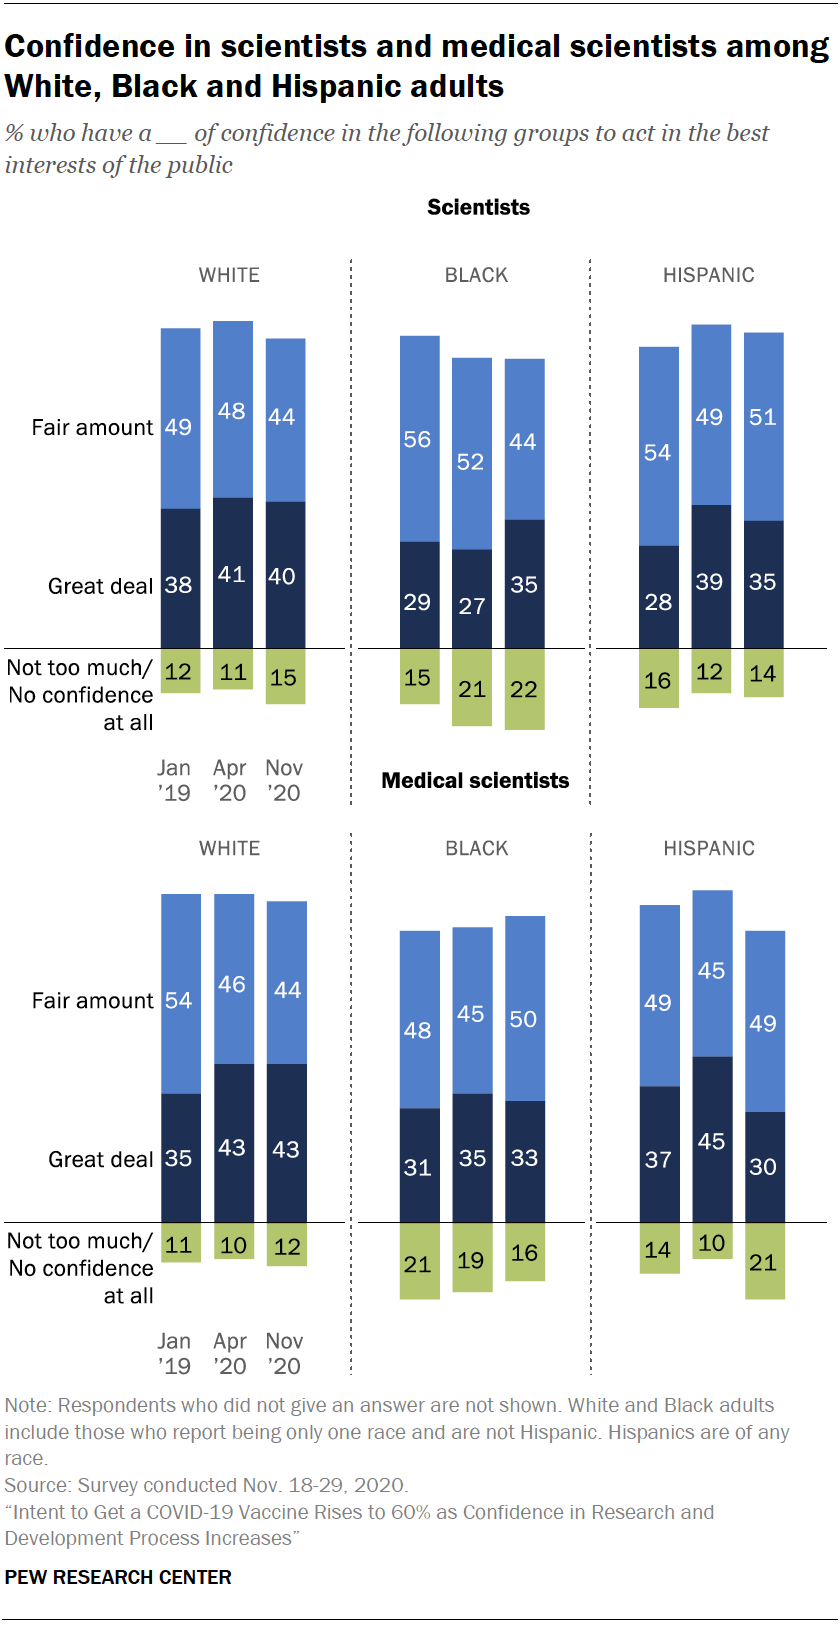 Chart shows confidence in scientists and medical scientists among White, Black and Hispanic adults